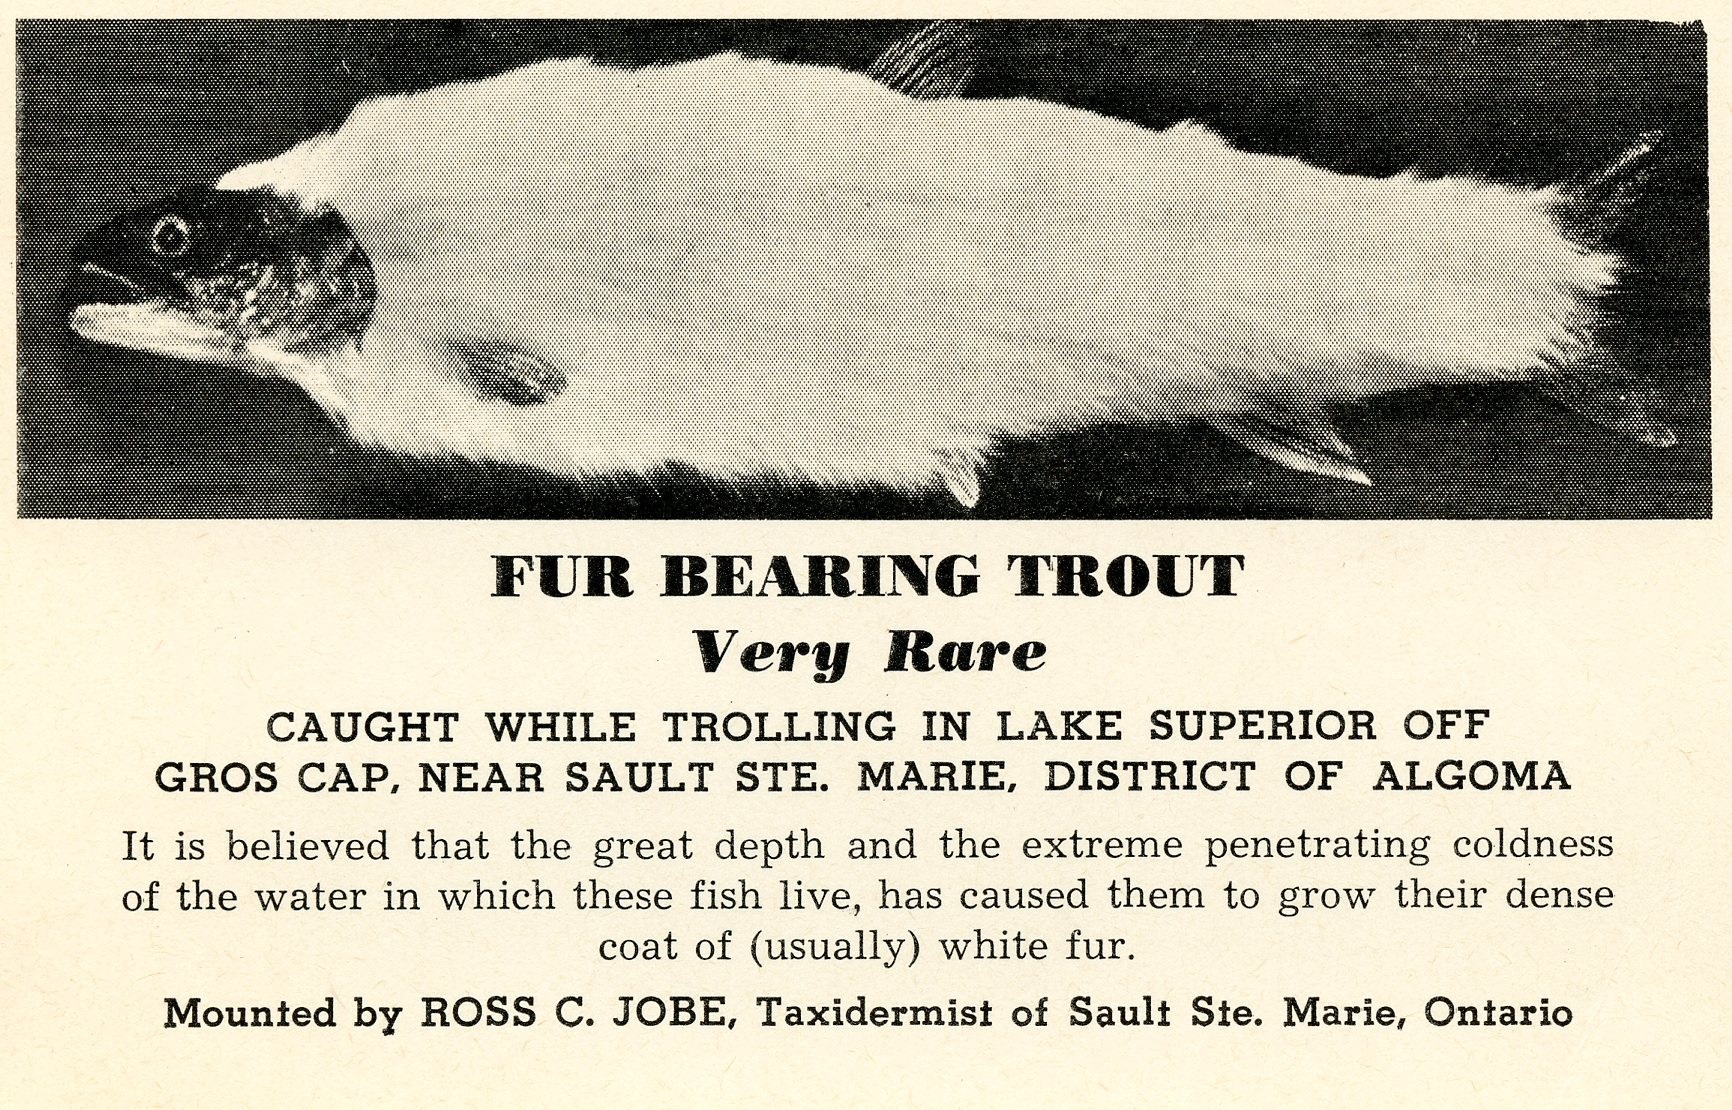 https://www.vmcdn.ca/f/files/sootoday/images/editorials/remember-this/fur-bearing-trout.jpg